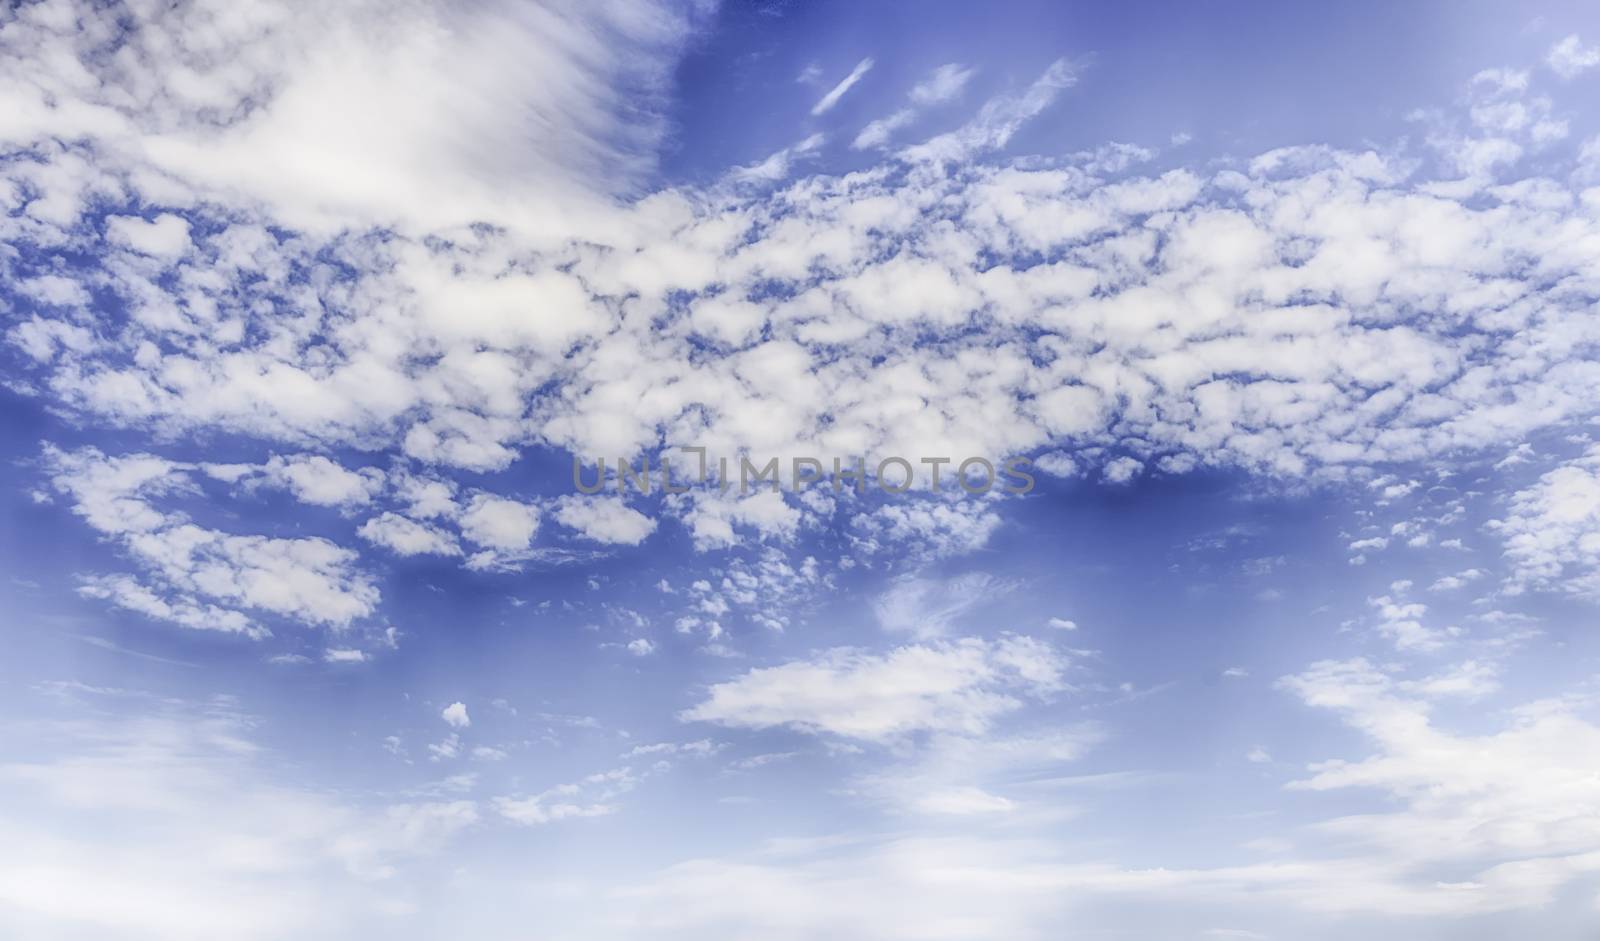 Dramatic blue sky with scenic clouds texture with copy space, may be used as background